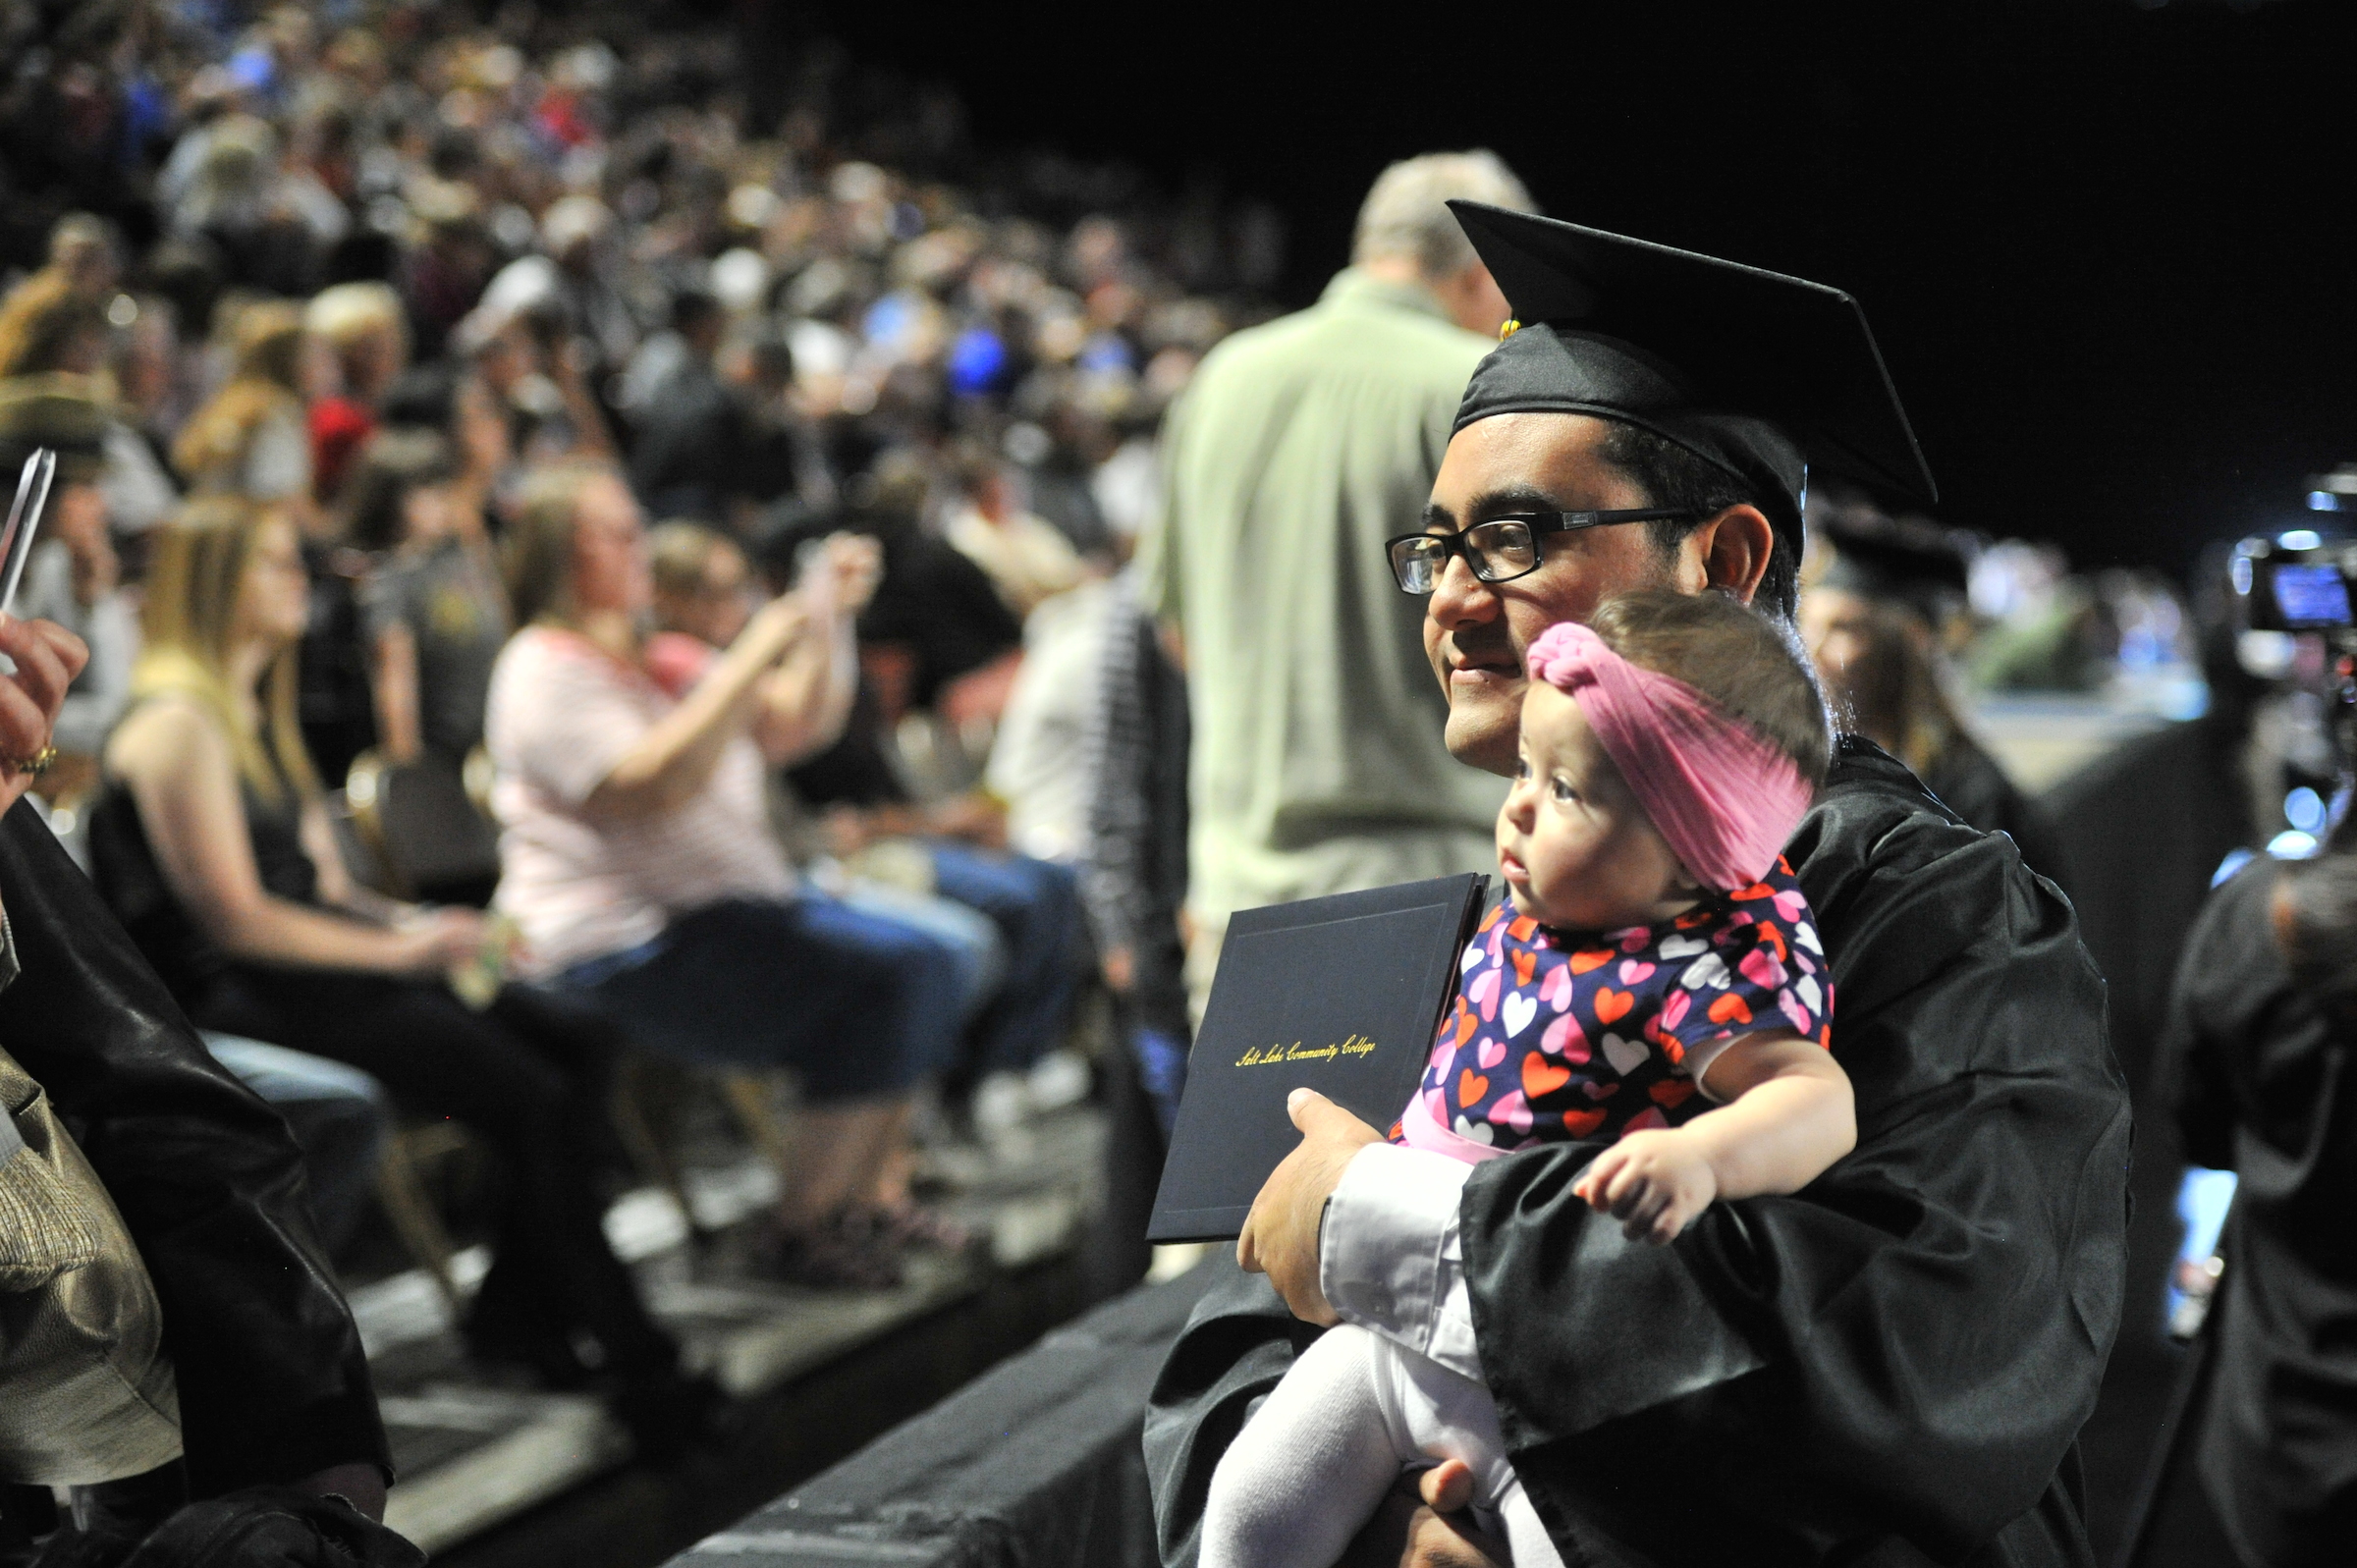 A graduate pauses for a photo with his daughter during the 2016 commencement ceremony for Salt Lake Community College.